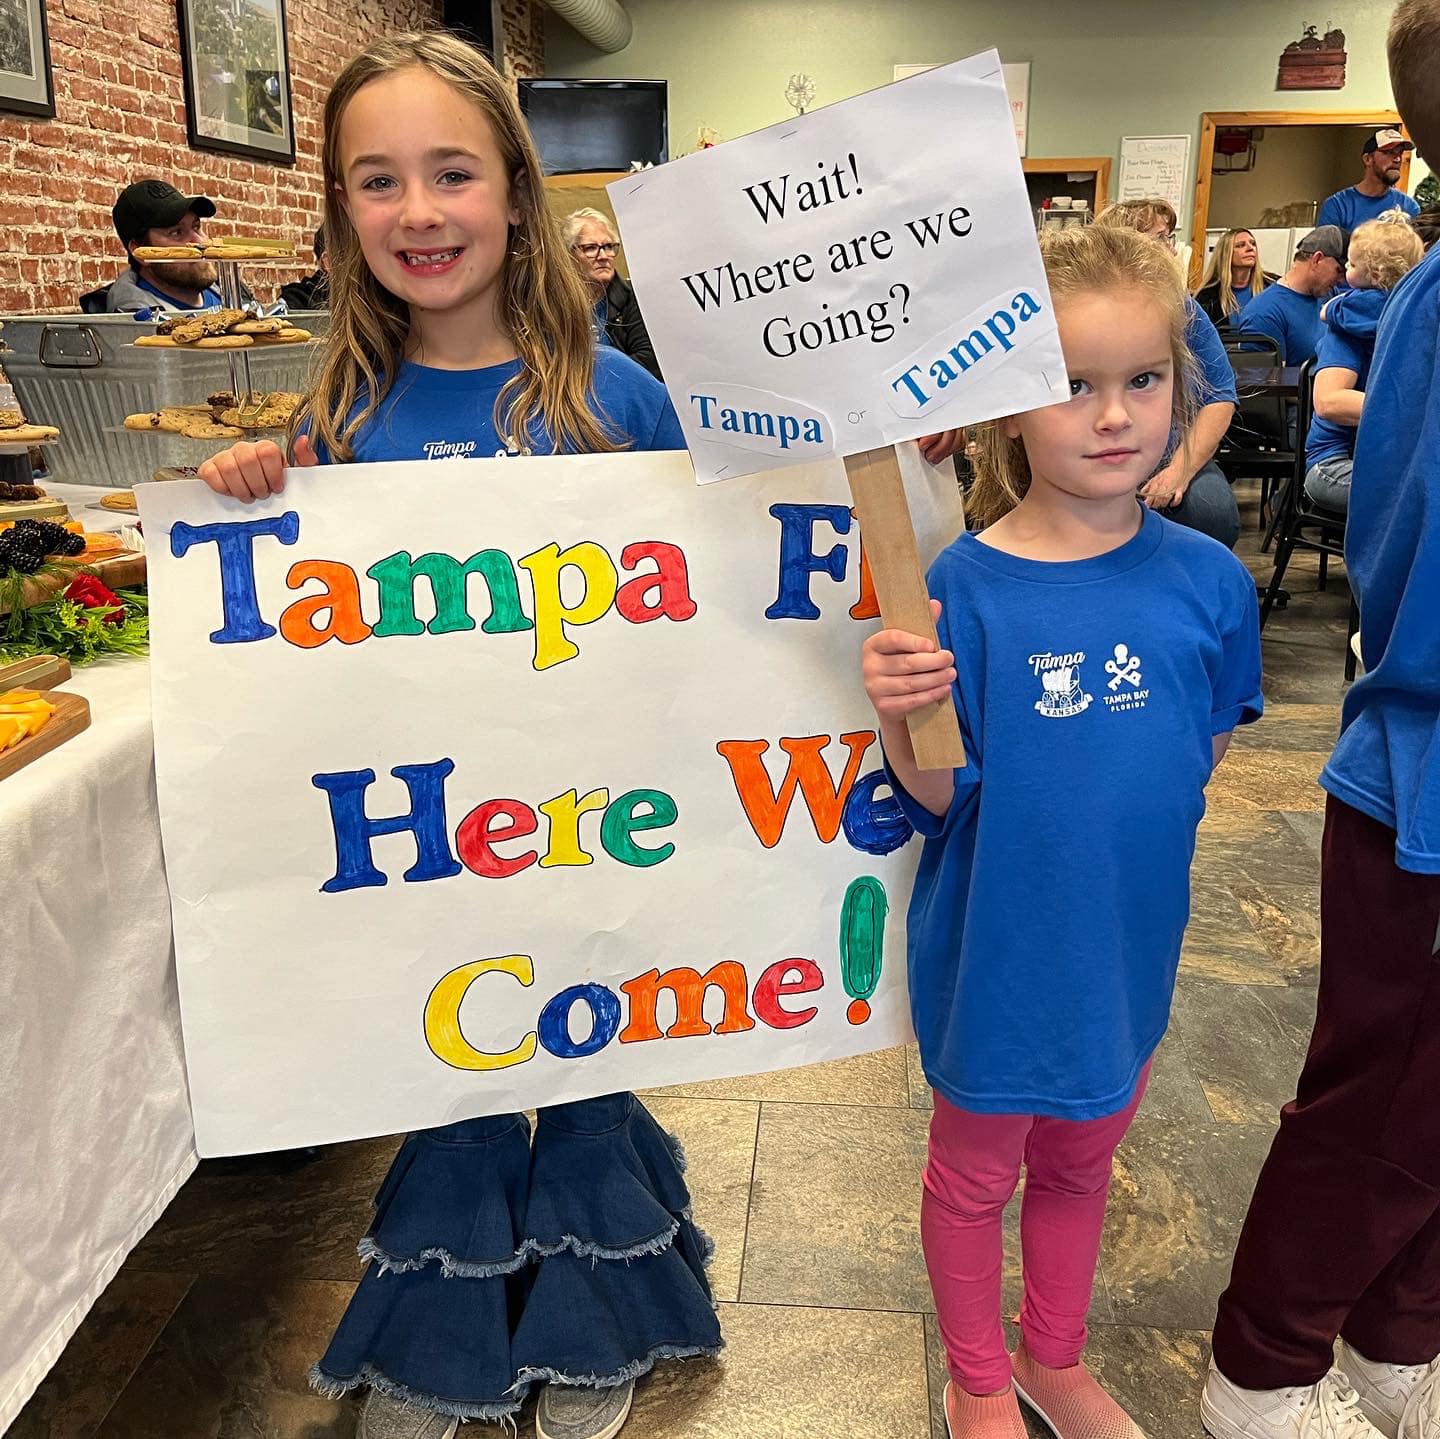 two little girls holding up signs that say "Tampa FL here we come" and "wait! Where are we going? Tampa"